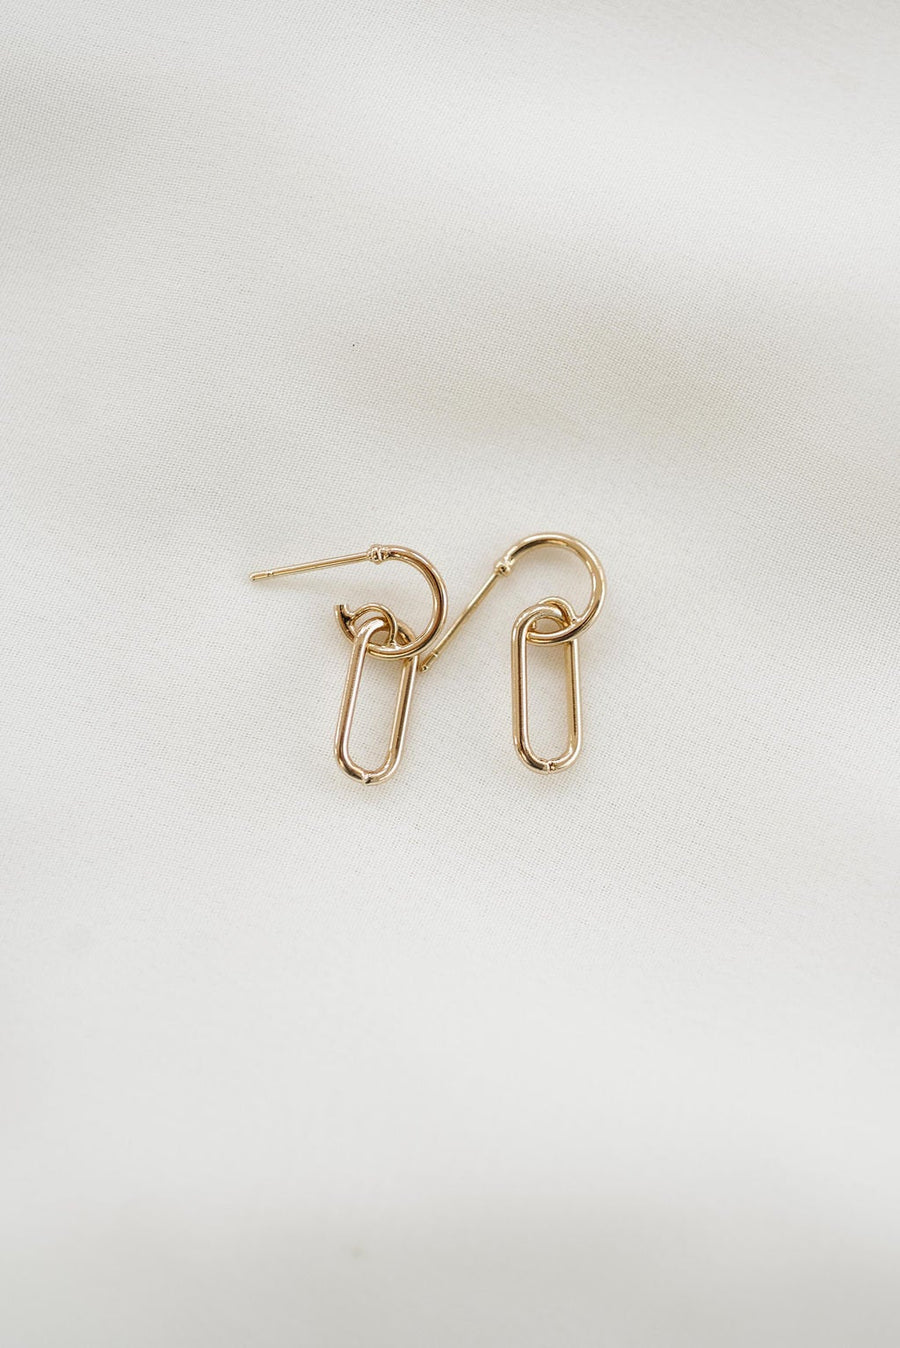 18k Gold-Filled Link Huggies, Link Earrings, Gold Earrings,Personalized Jewelry, Handmade Jewelry, Gifts for Her, Mother&#39;s Day, Birthday